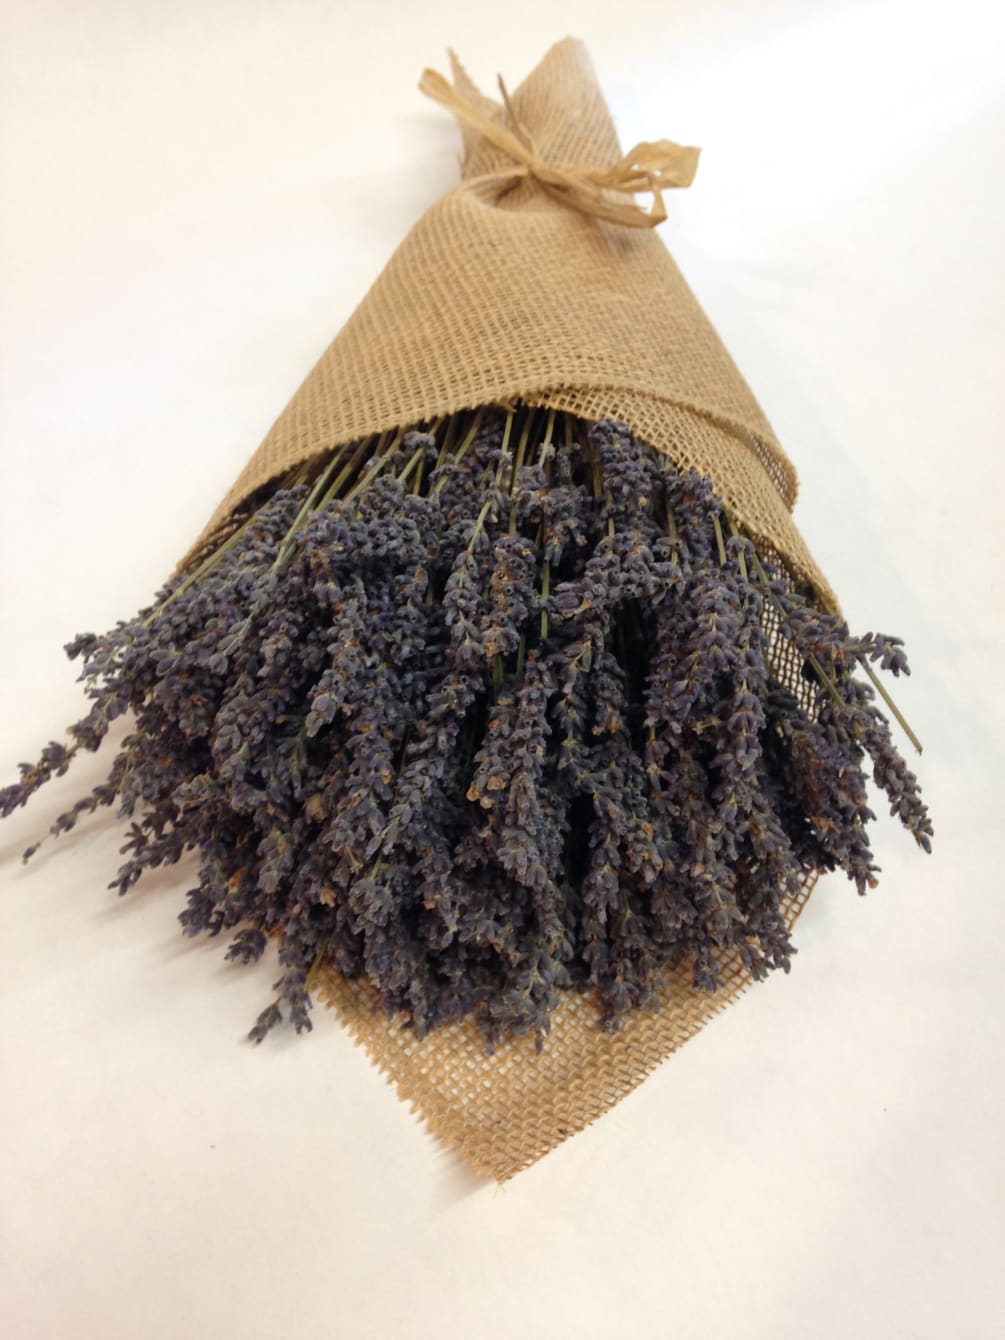 This lush bundle of dried French lavender consists of over 150 stems